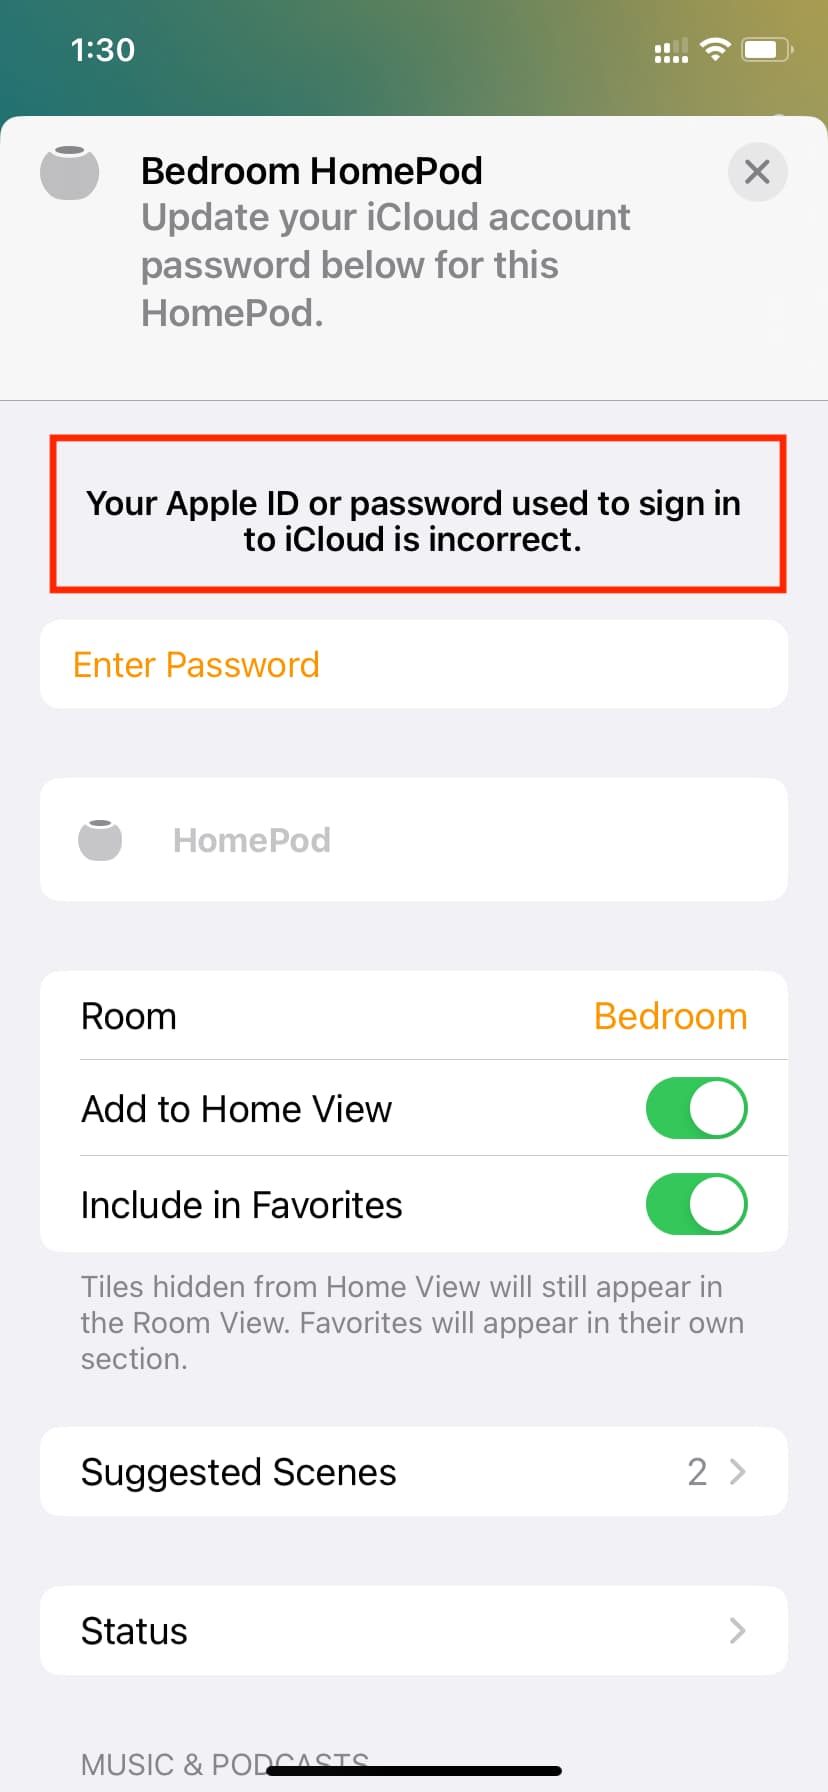 Your Apple ID or password used to sign in to iCloud is incorrect message in Home app on iPhone